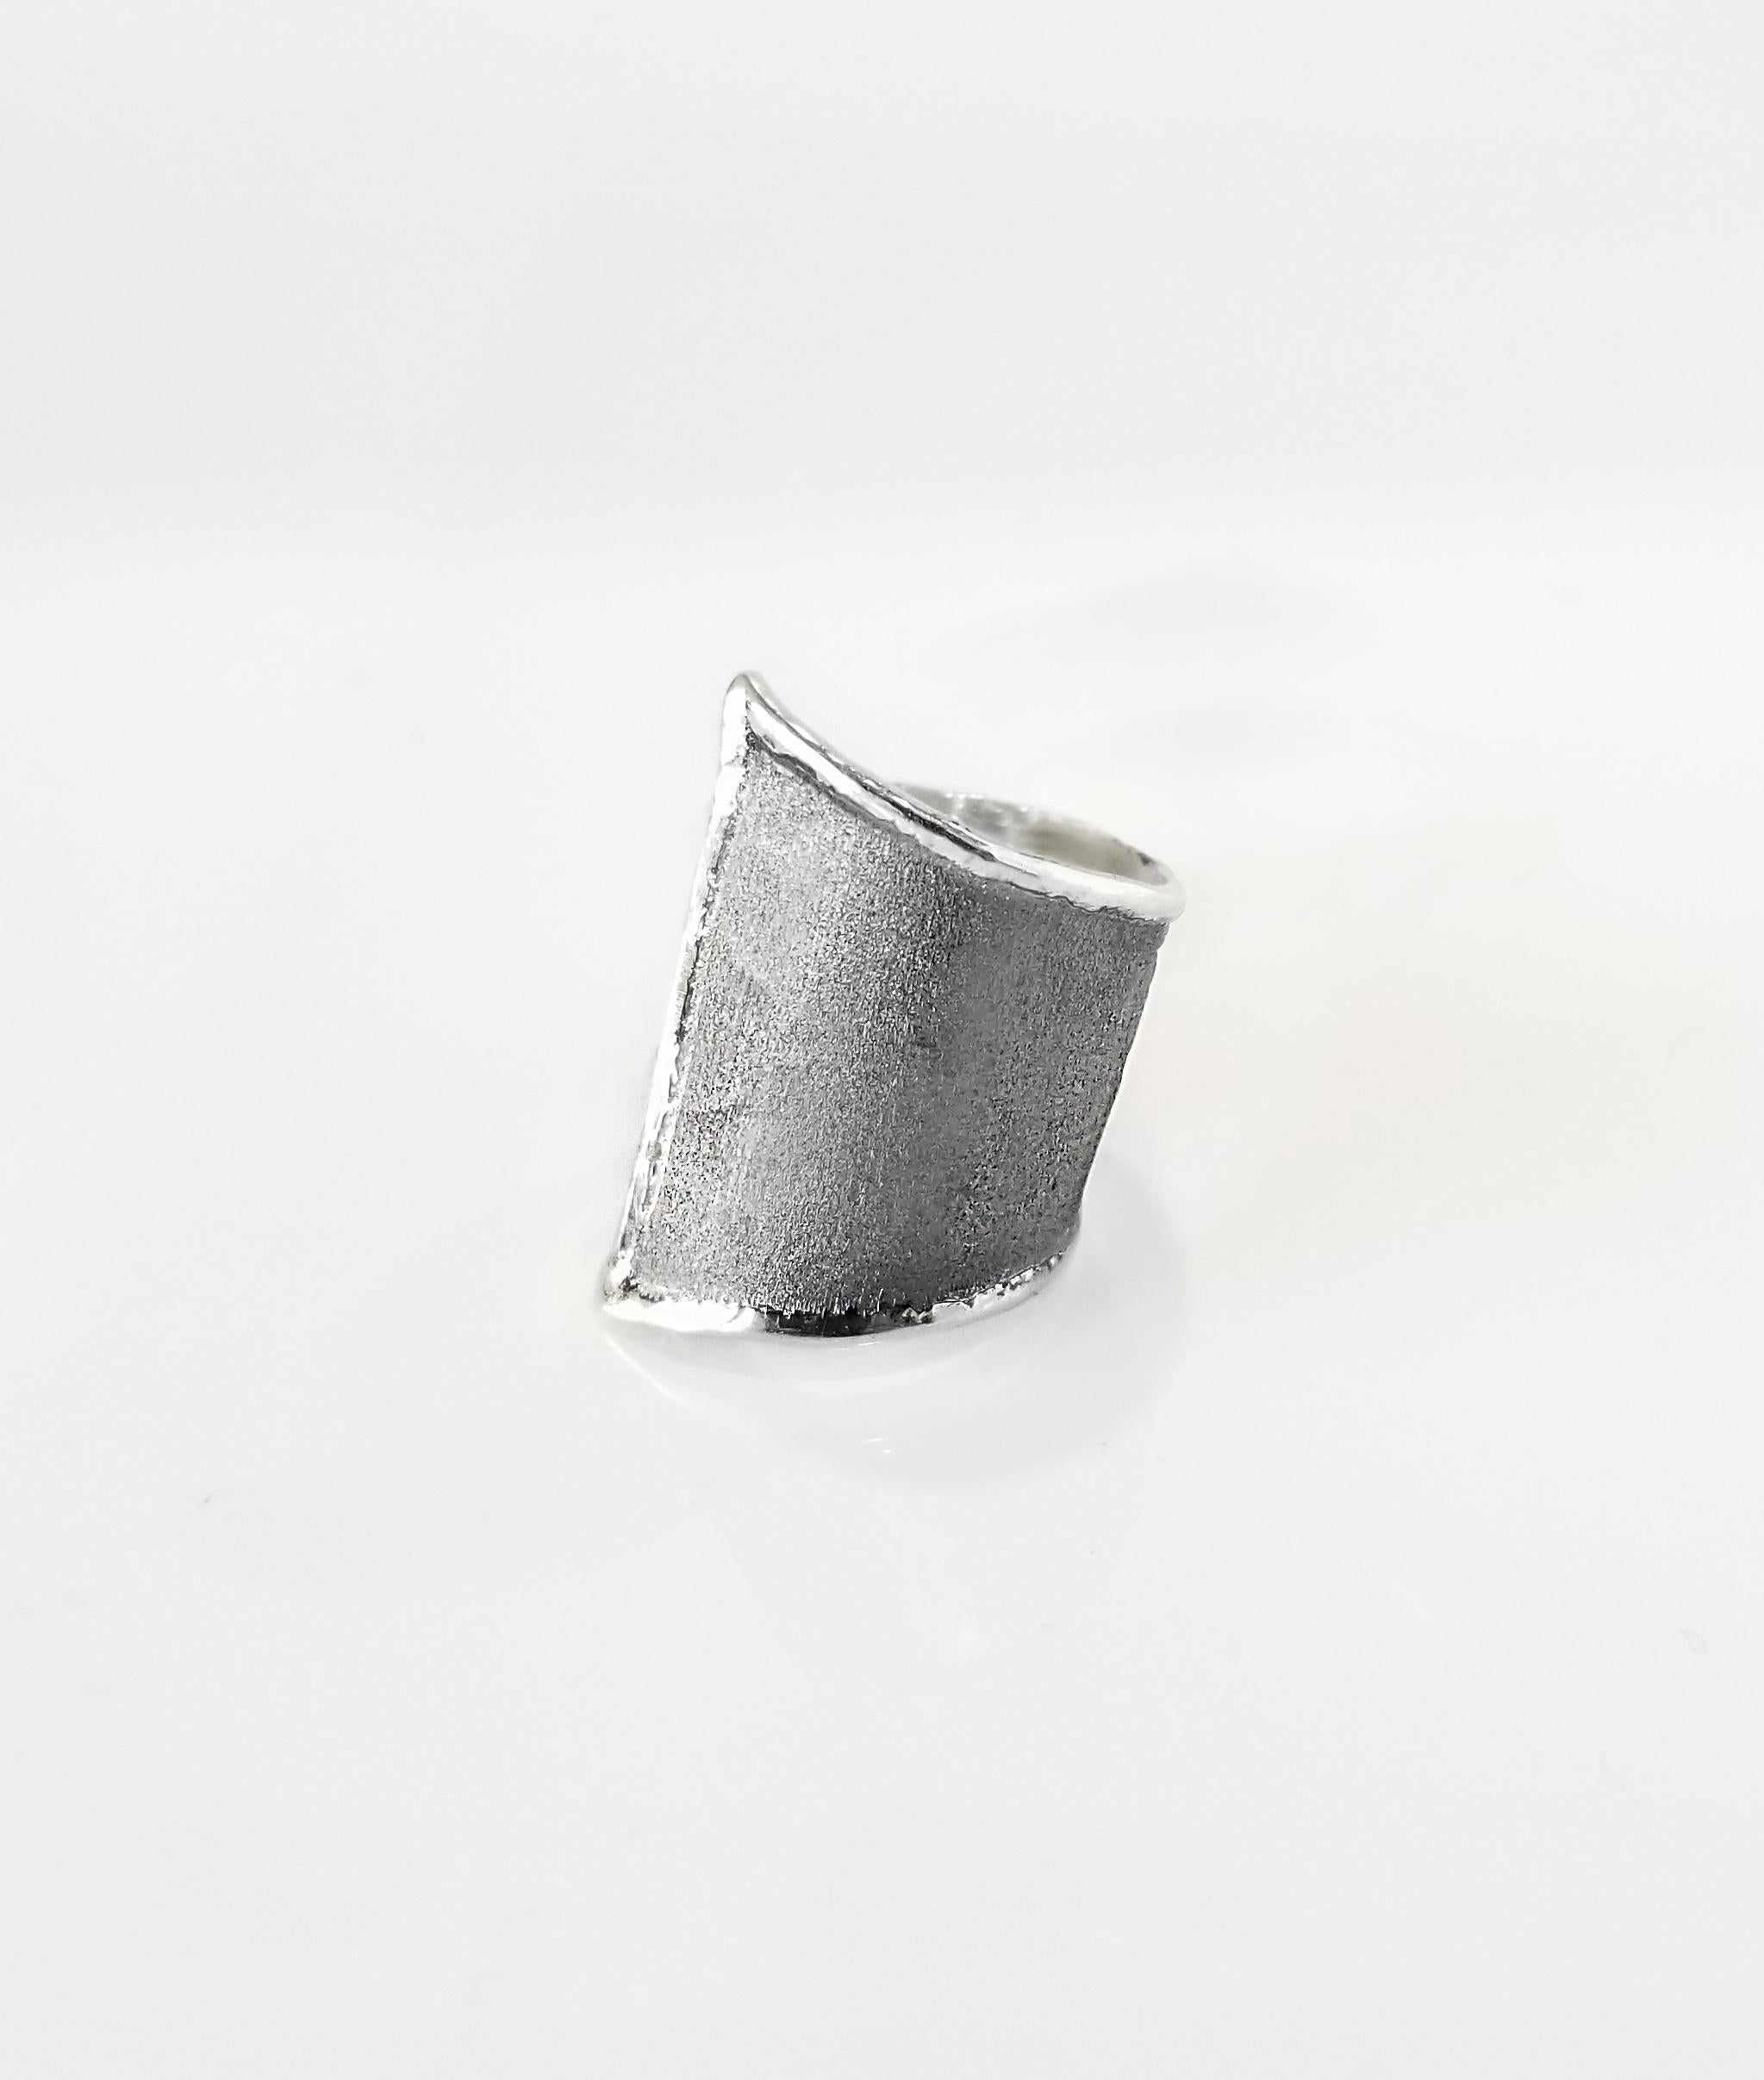 Yianni Creations Hephestos Collection 100% Handmade Artisan Ring from Fine Silver. The ring features unique oxidized Rhodium background complemented by unique techniques of craftsmanship - brushed texture and nature-inspired liquid edges. The core